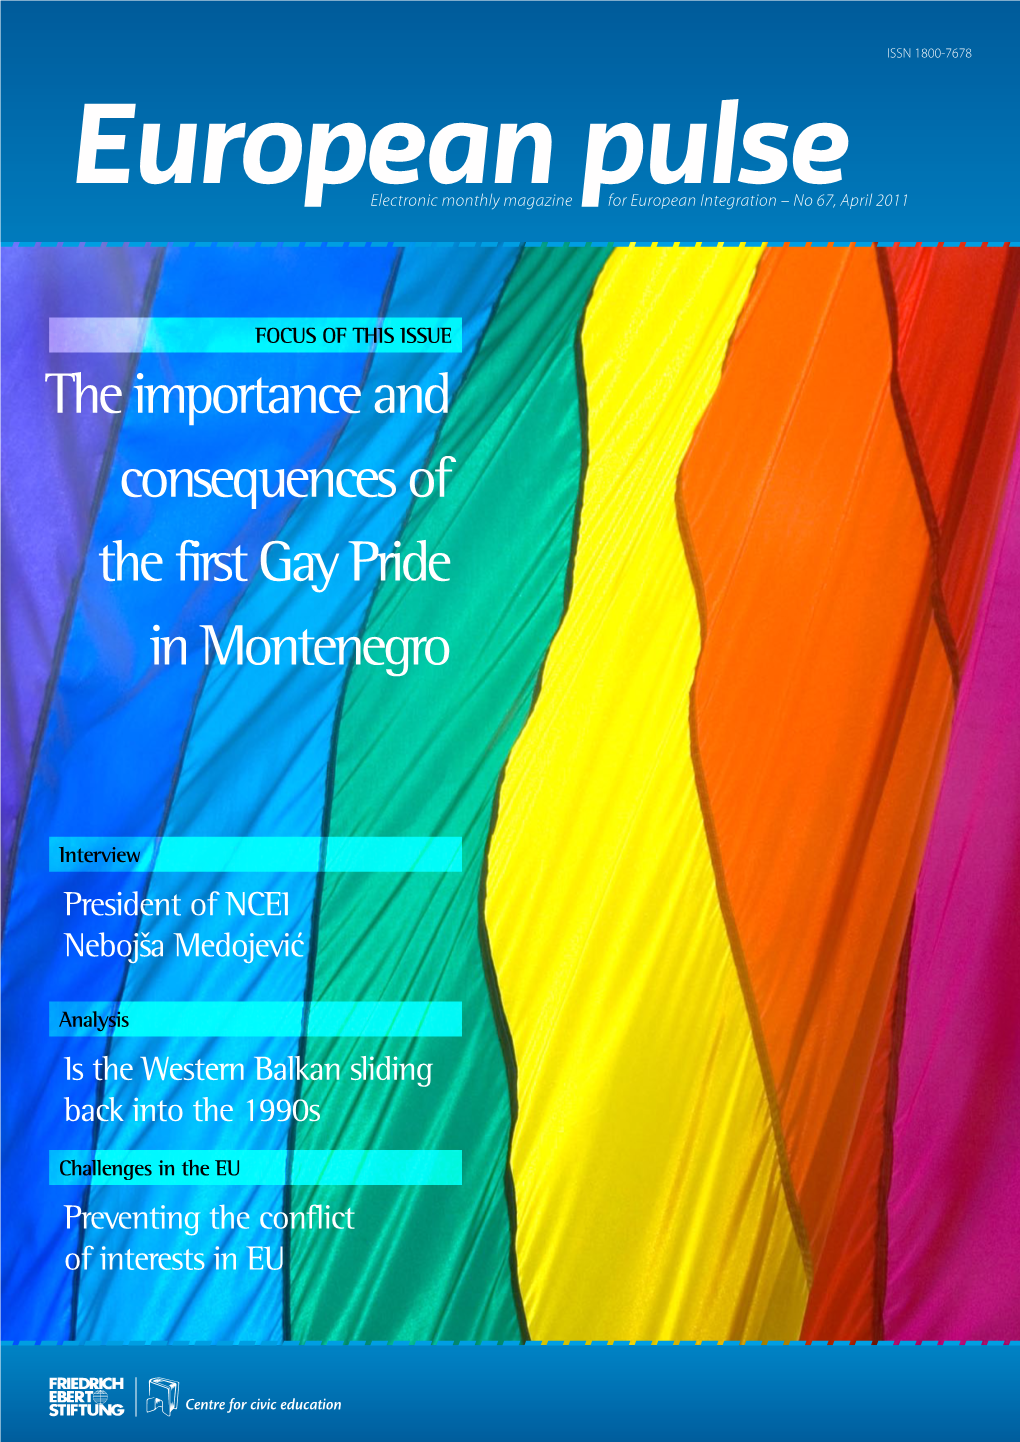 The Importance and Consequences of the First Gay Pride in Montenegro